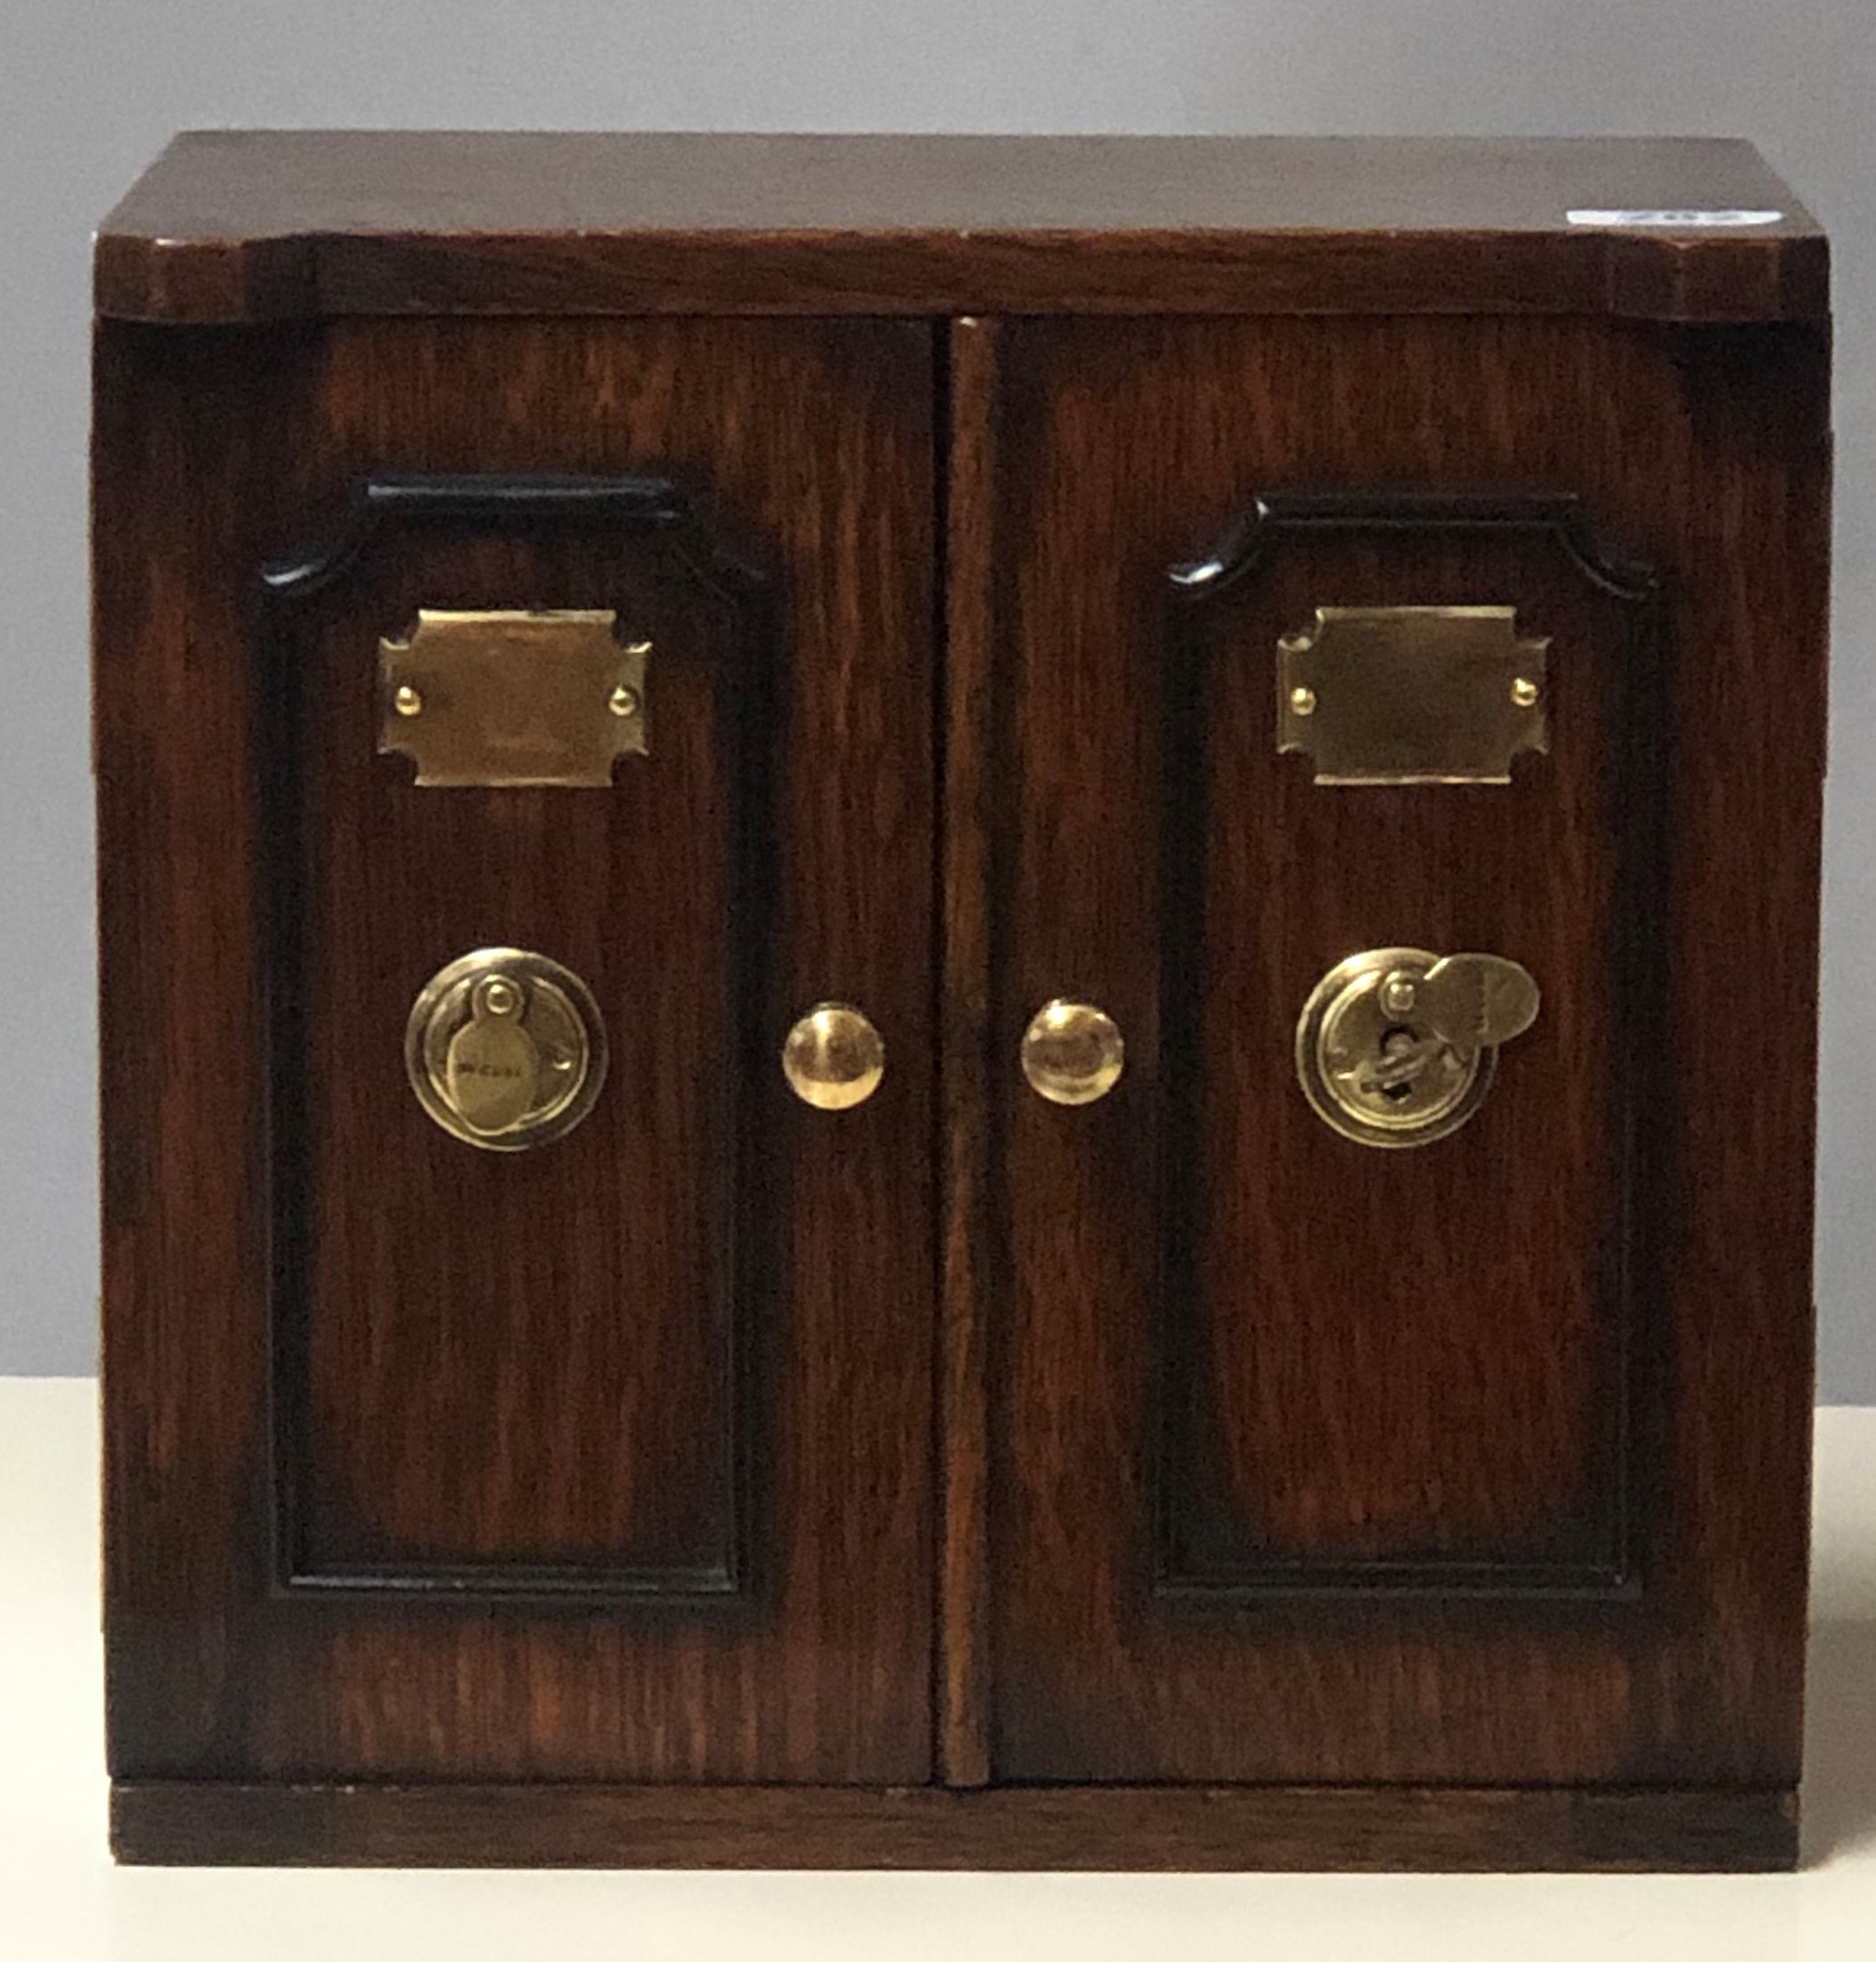 AN EARLY 20TH CENTURY OAK TABLE TOP COLLECTOR'S CHEST In the form of a safe, the two doors with